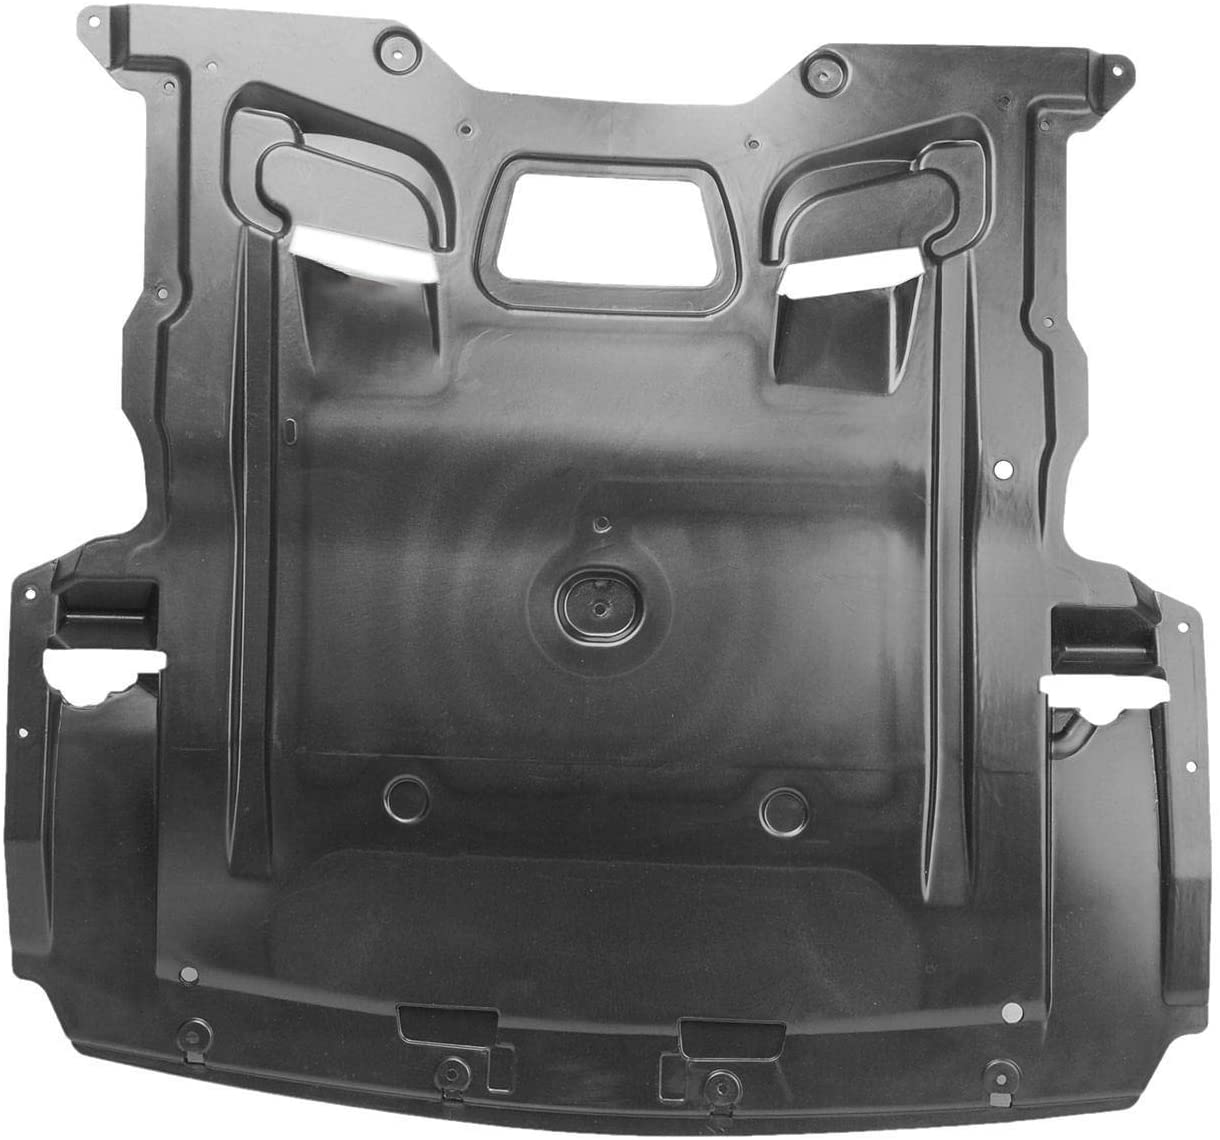 Aftermarket UNDER ENGINE COVERS for BMW - 740I, 740i,09-15,Lower engine cover